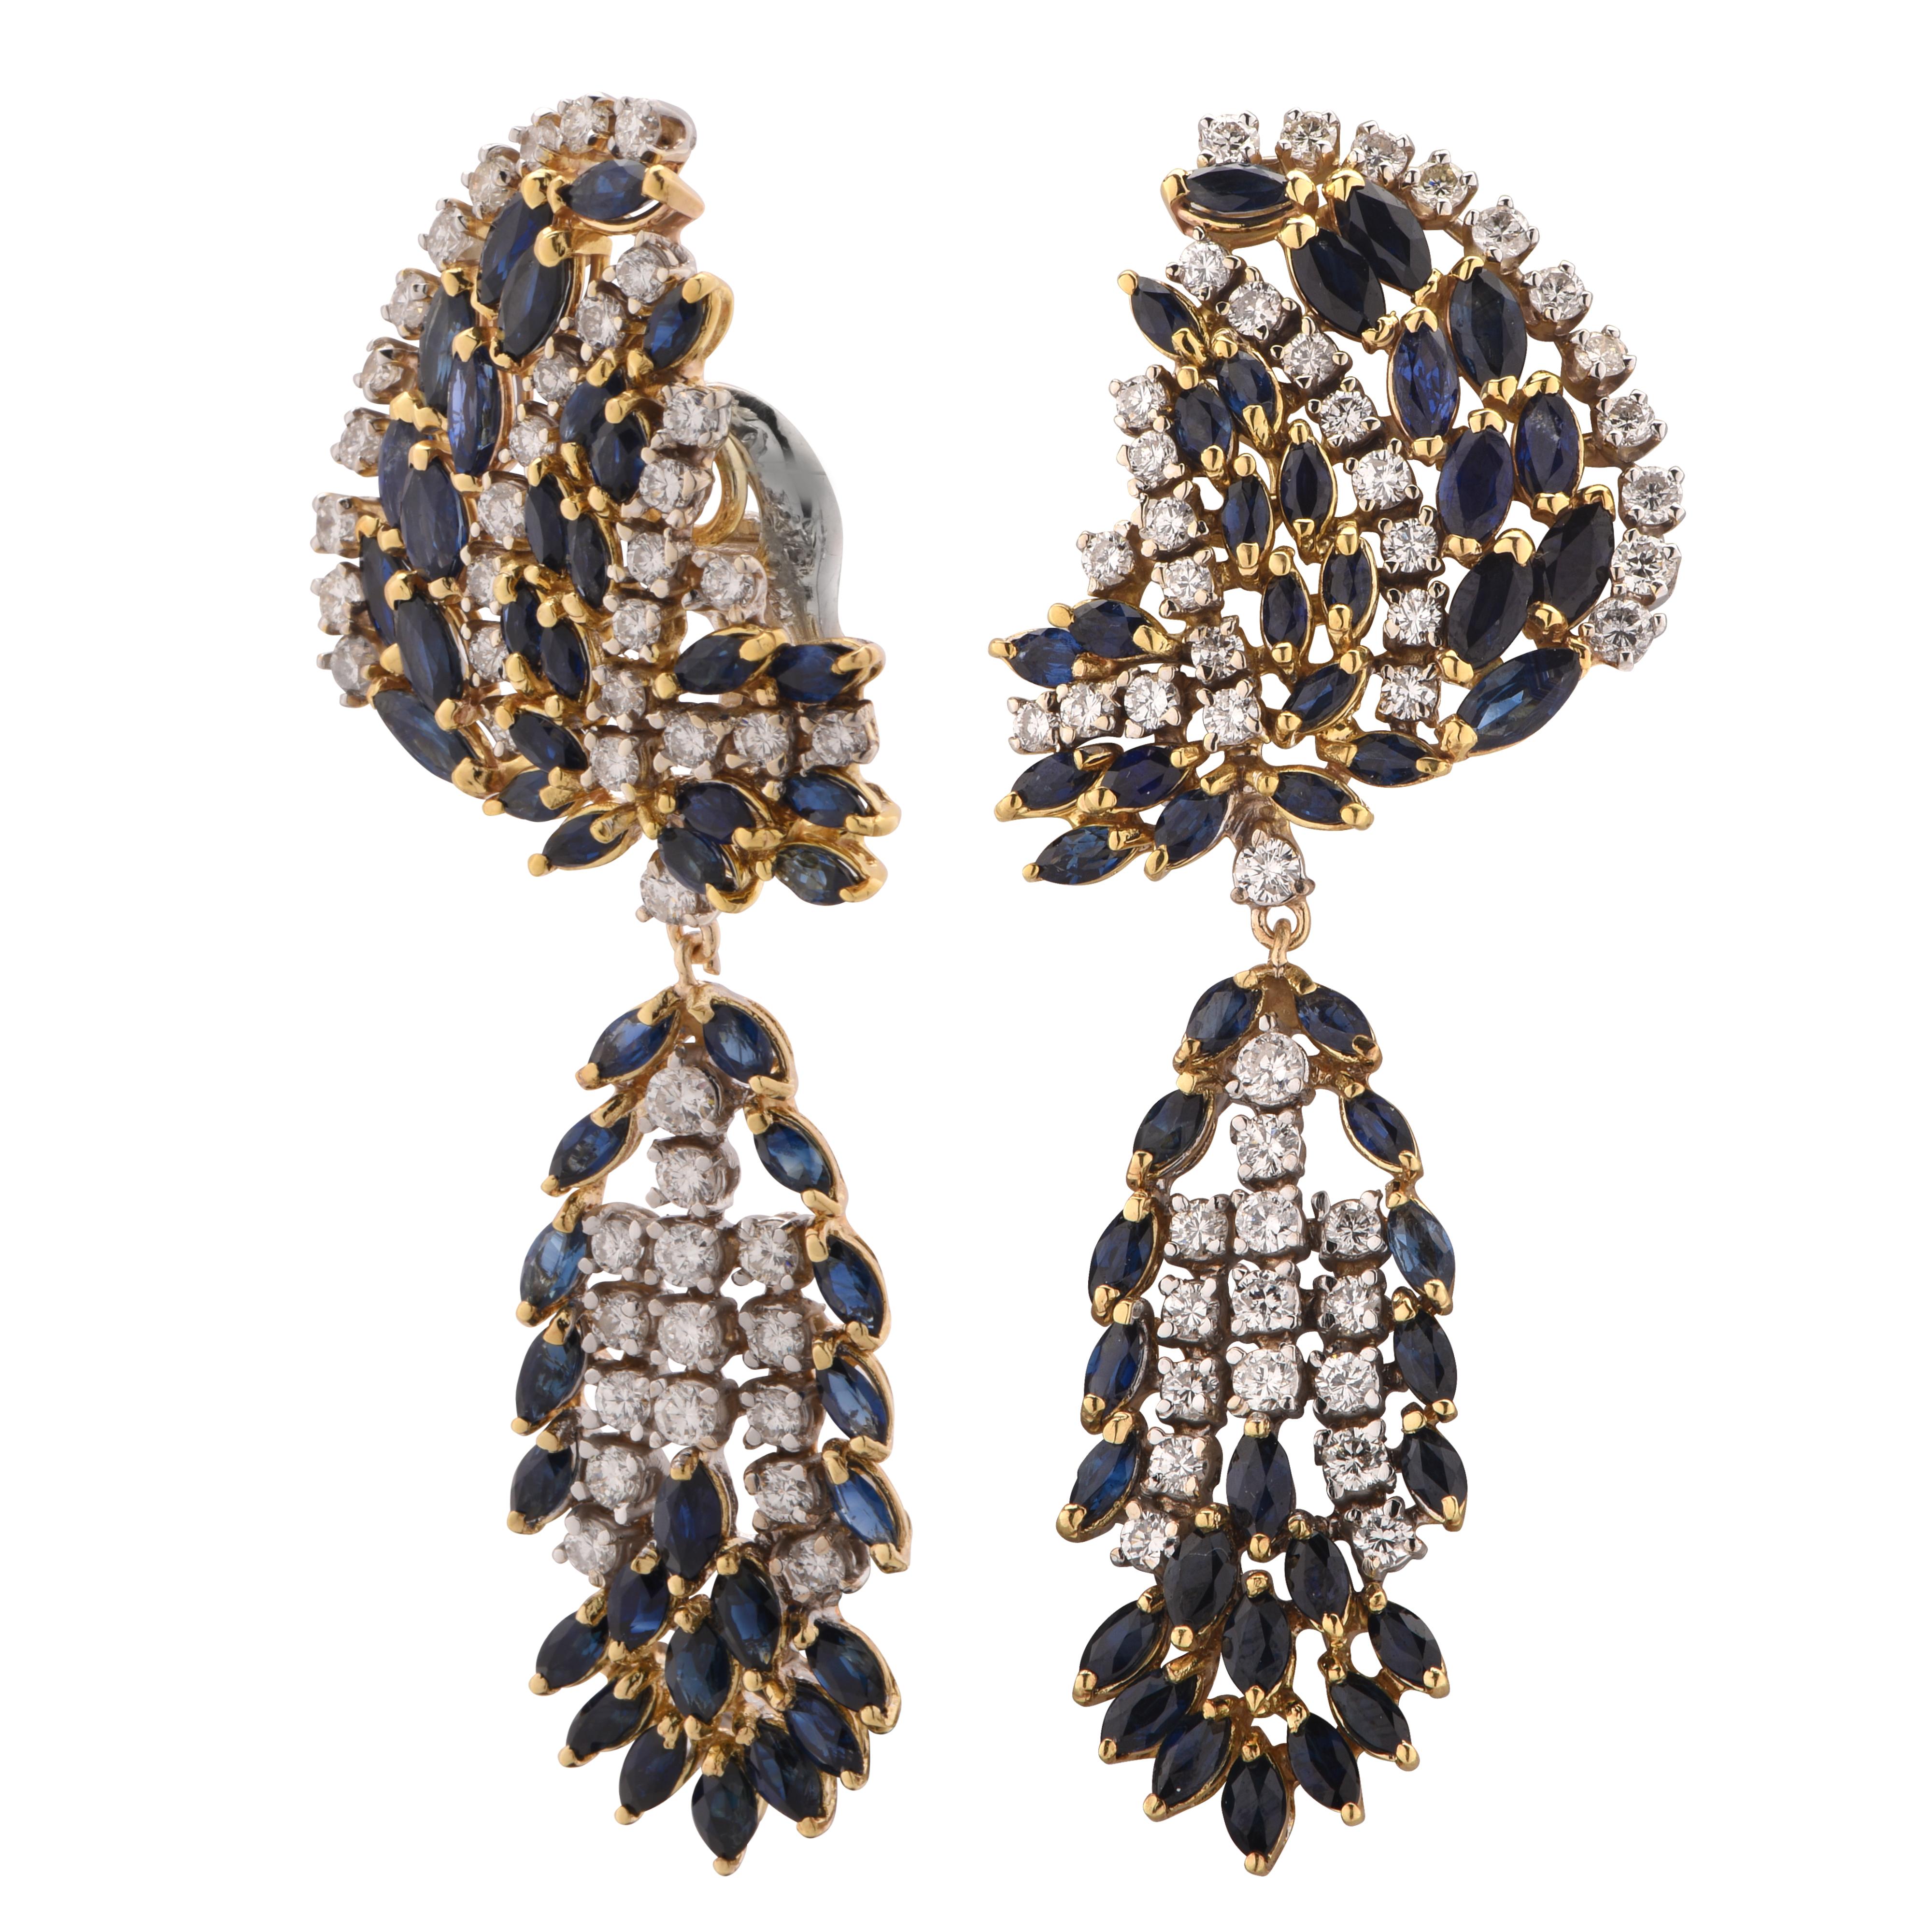 Dazzling dangle earrings crafted in 18 karat white and yellow gold featuring 90 round brilliant cut diamonds weighing approximately 4.5 carats total G color VS-SI clarity, accented by 102 marquise cut sapphires weighing approximately 10 carats